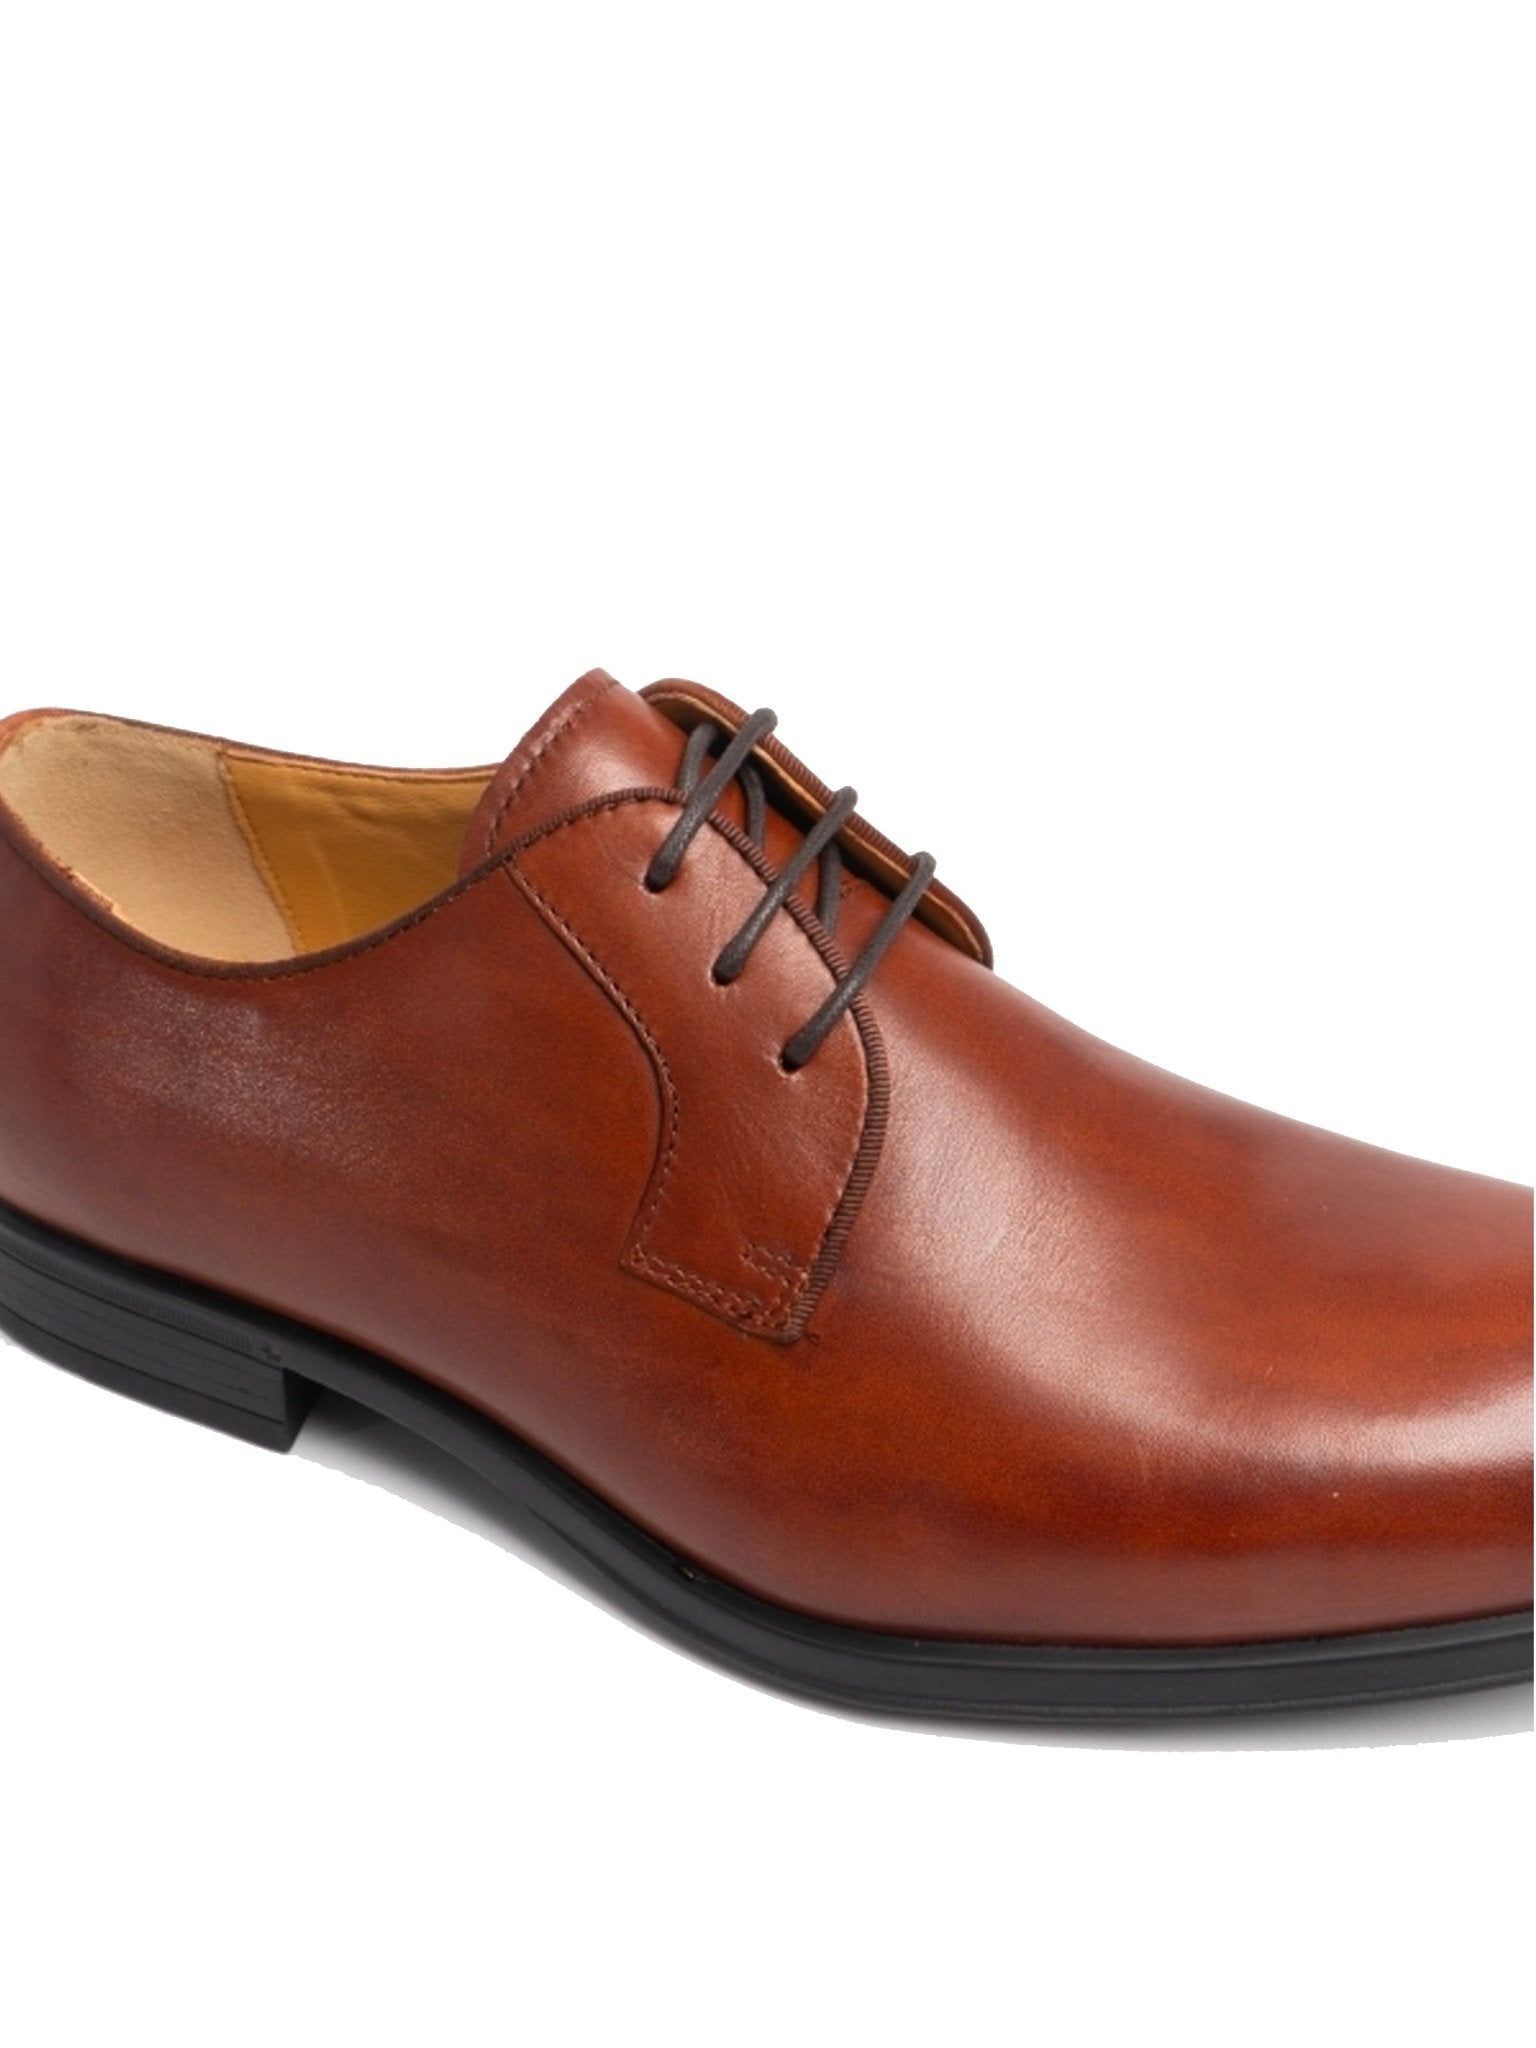 Steptronic Steptronic - Faro Mens Shoes / Waxed Leather Mens Derby Shoes Shoes